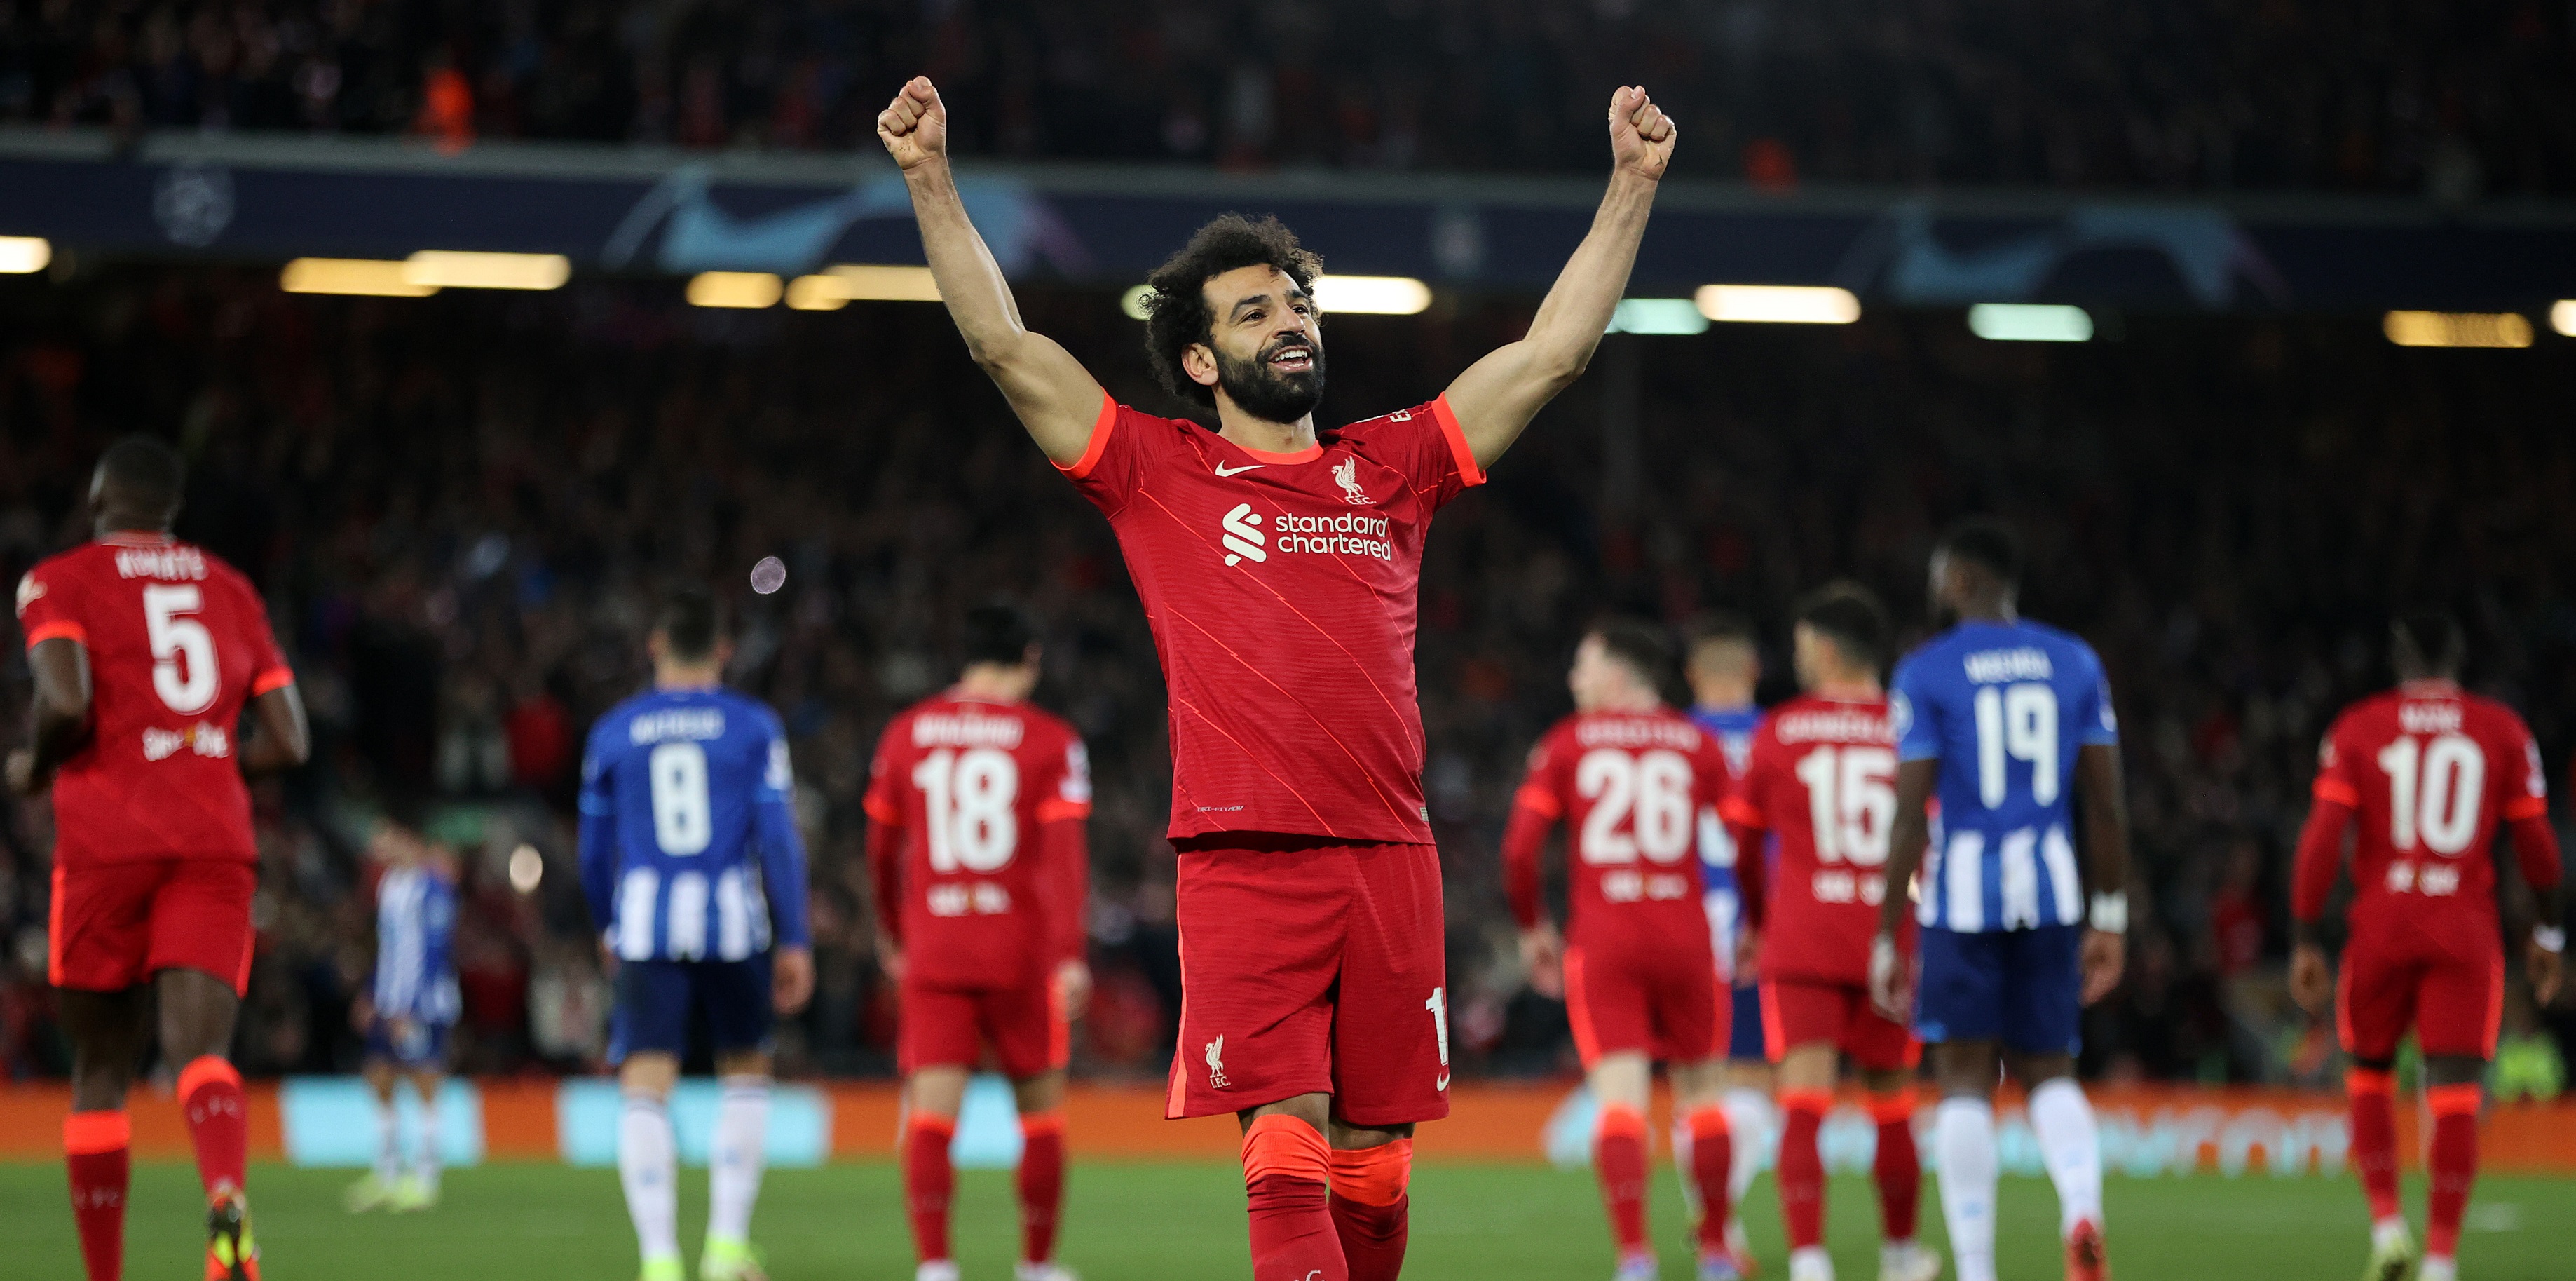 Finance guru names three outfits that could afford to sign Liverpool’s Mo Salah